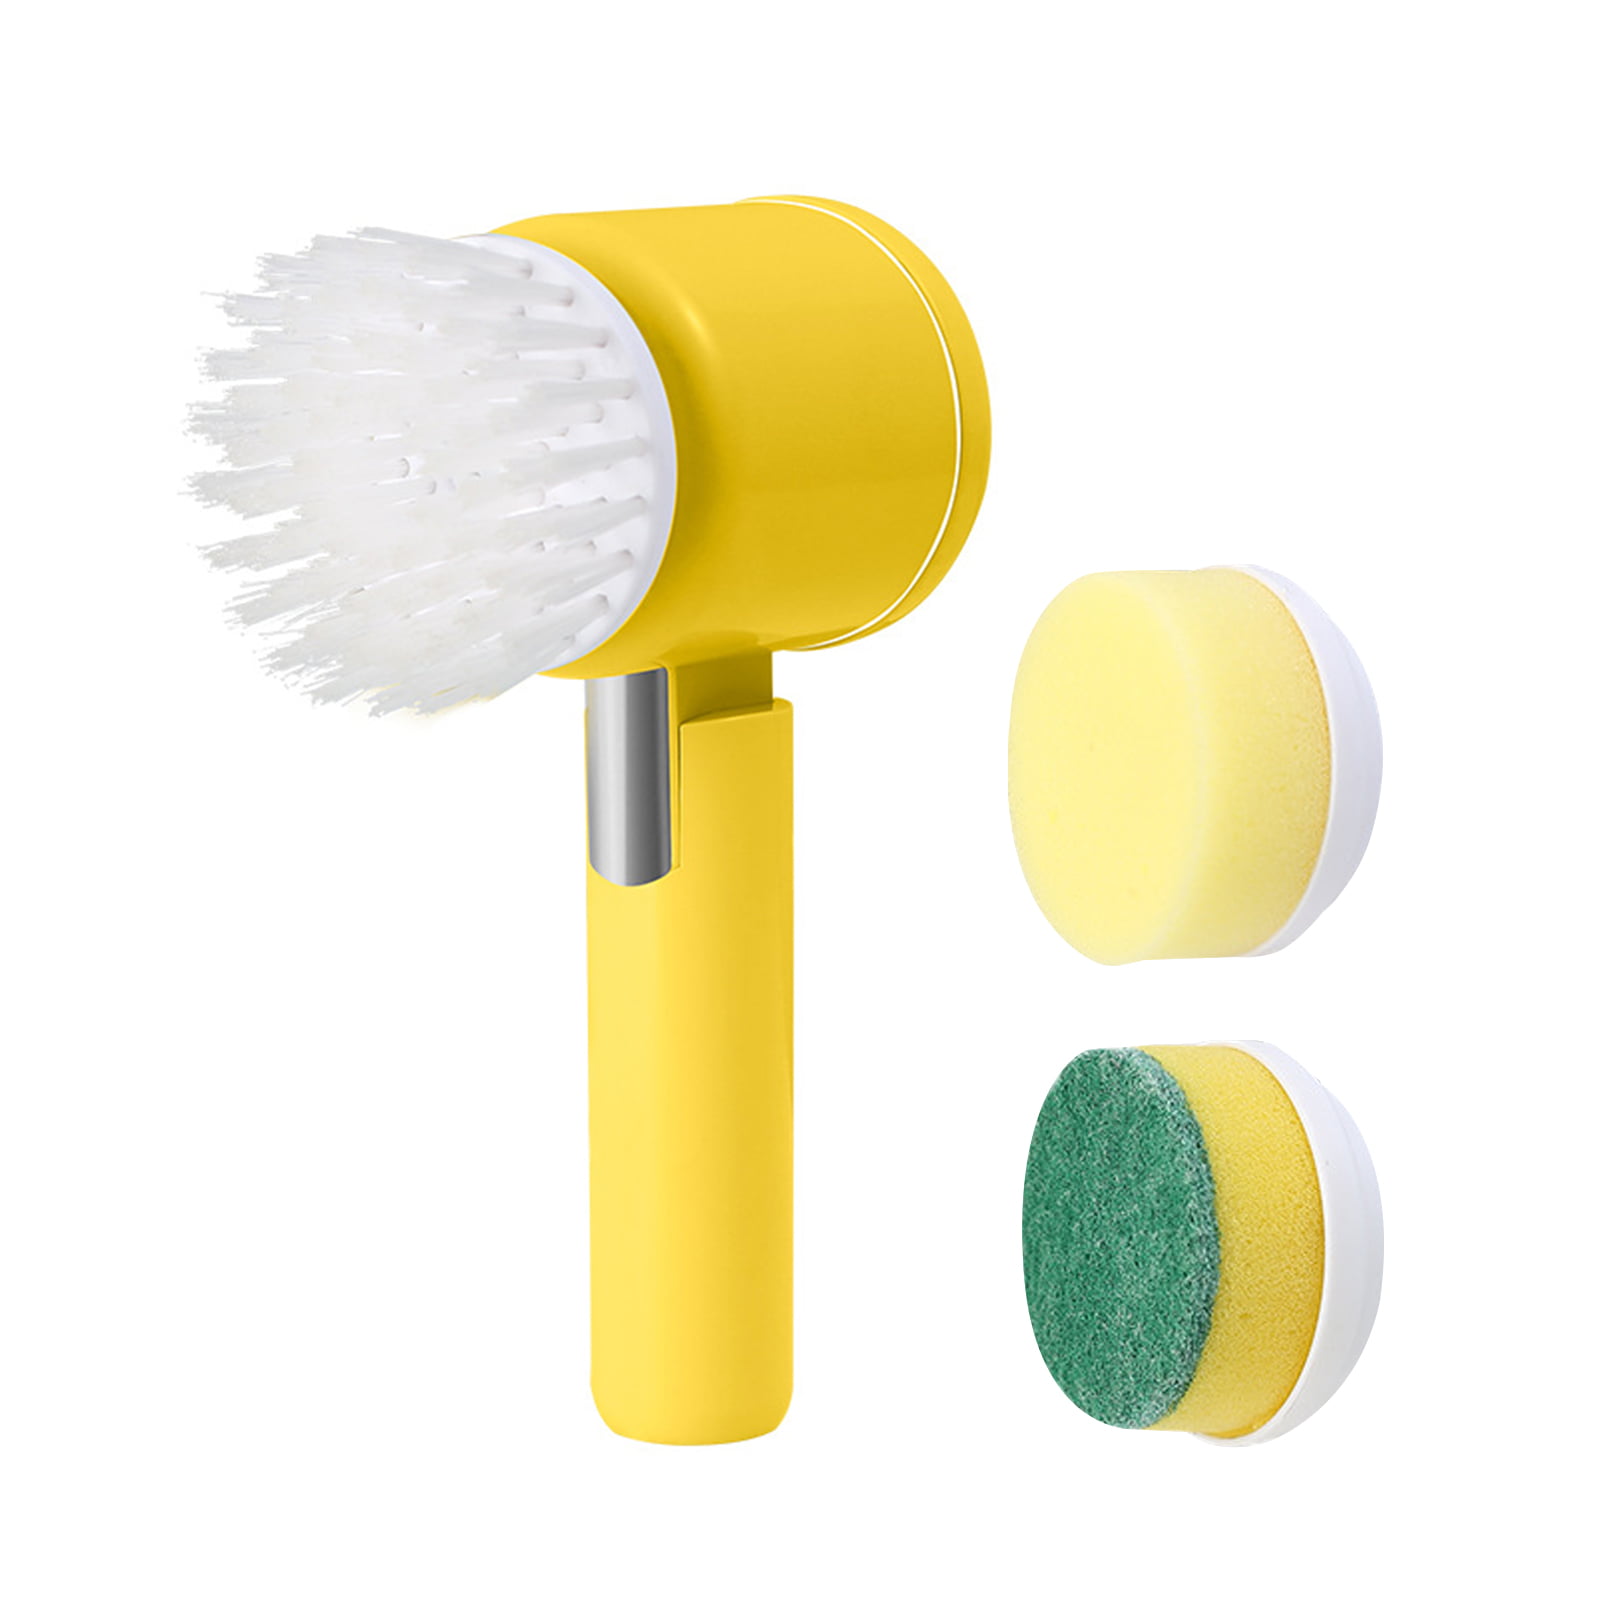 ZZ Life Electric Scrubber, Handheld Cleaning Brush, Includes 5 Replaceable Heads, Bathroom, Kitchen, Floor, Dish, Shoe, Glass - Multifunctional Home